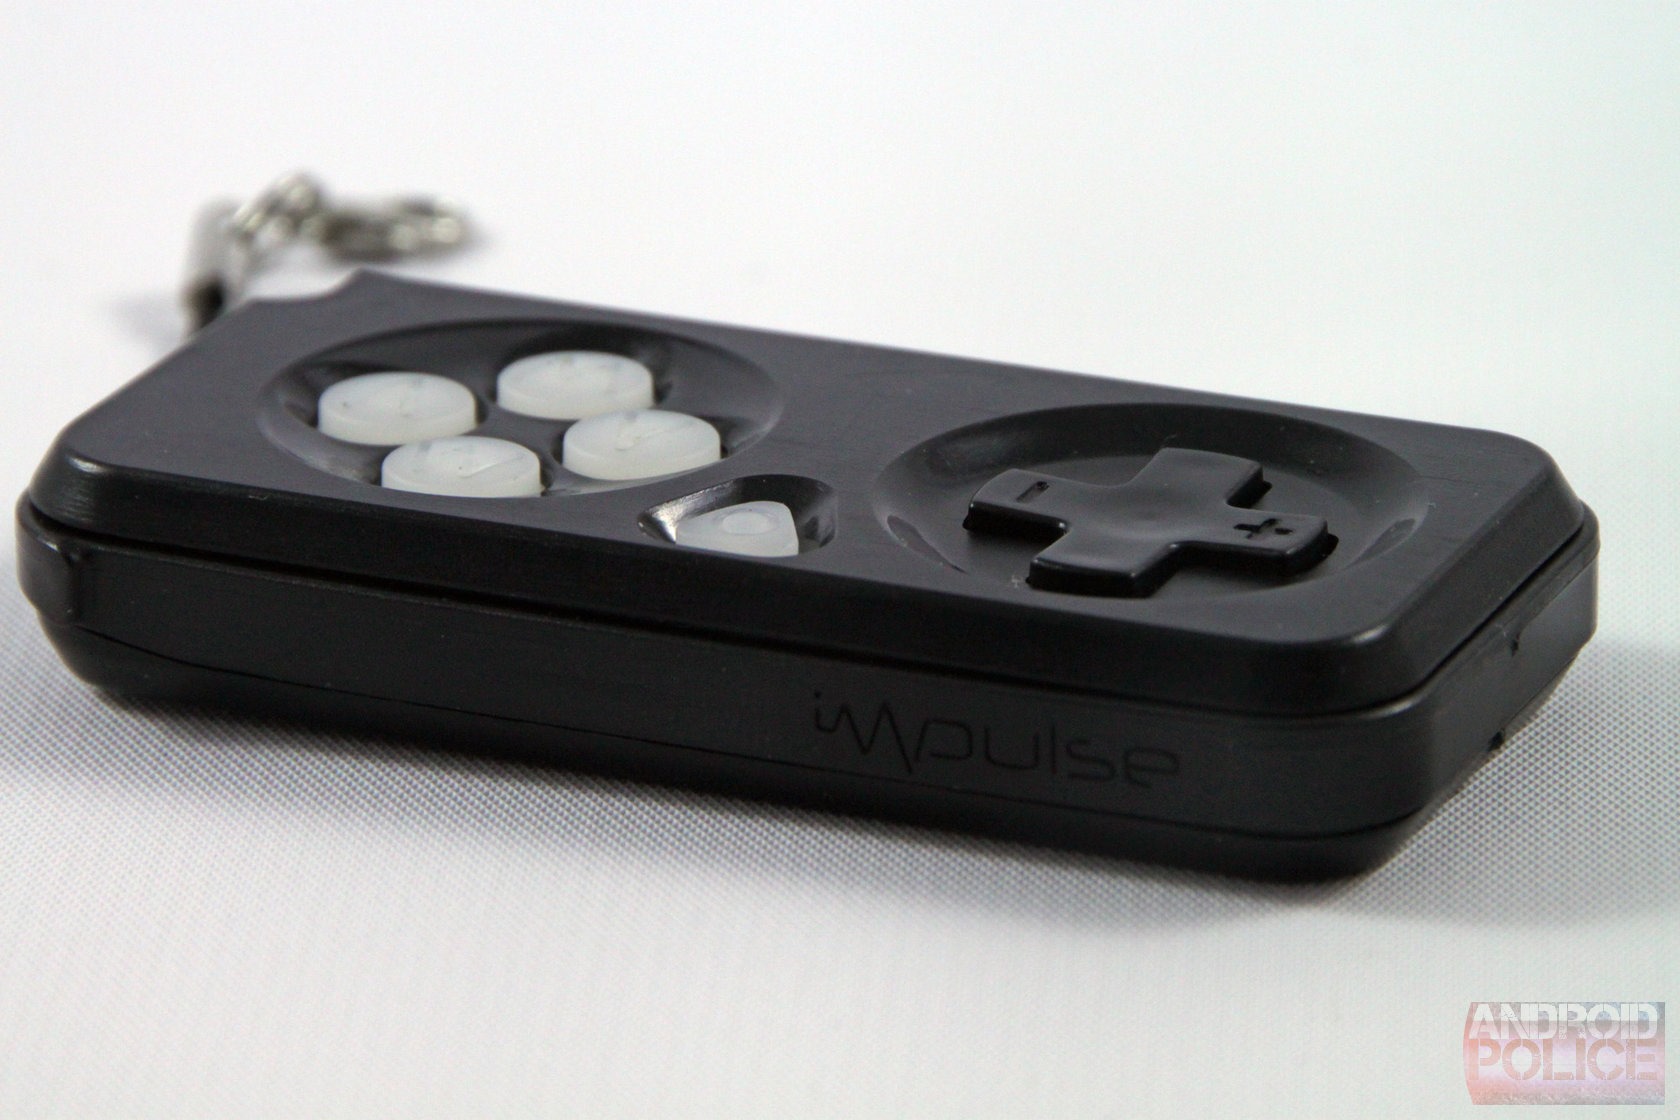 Geek insider, geekinsider, geekinsider. Com,, impulse: a tiny, yet accurate, gaming controller, uncategorized